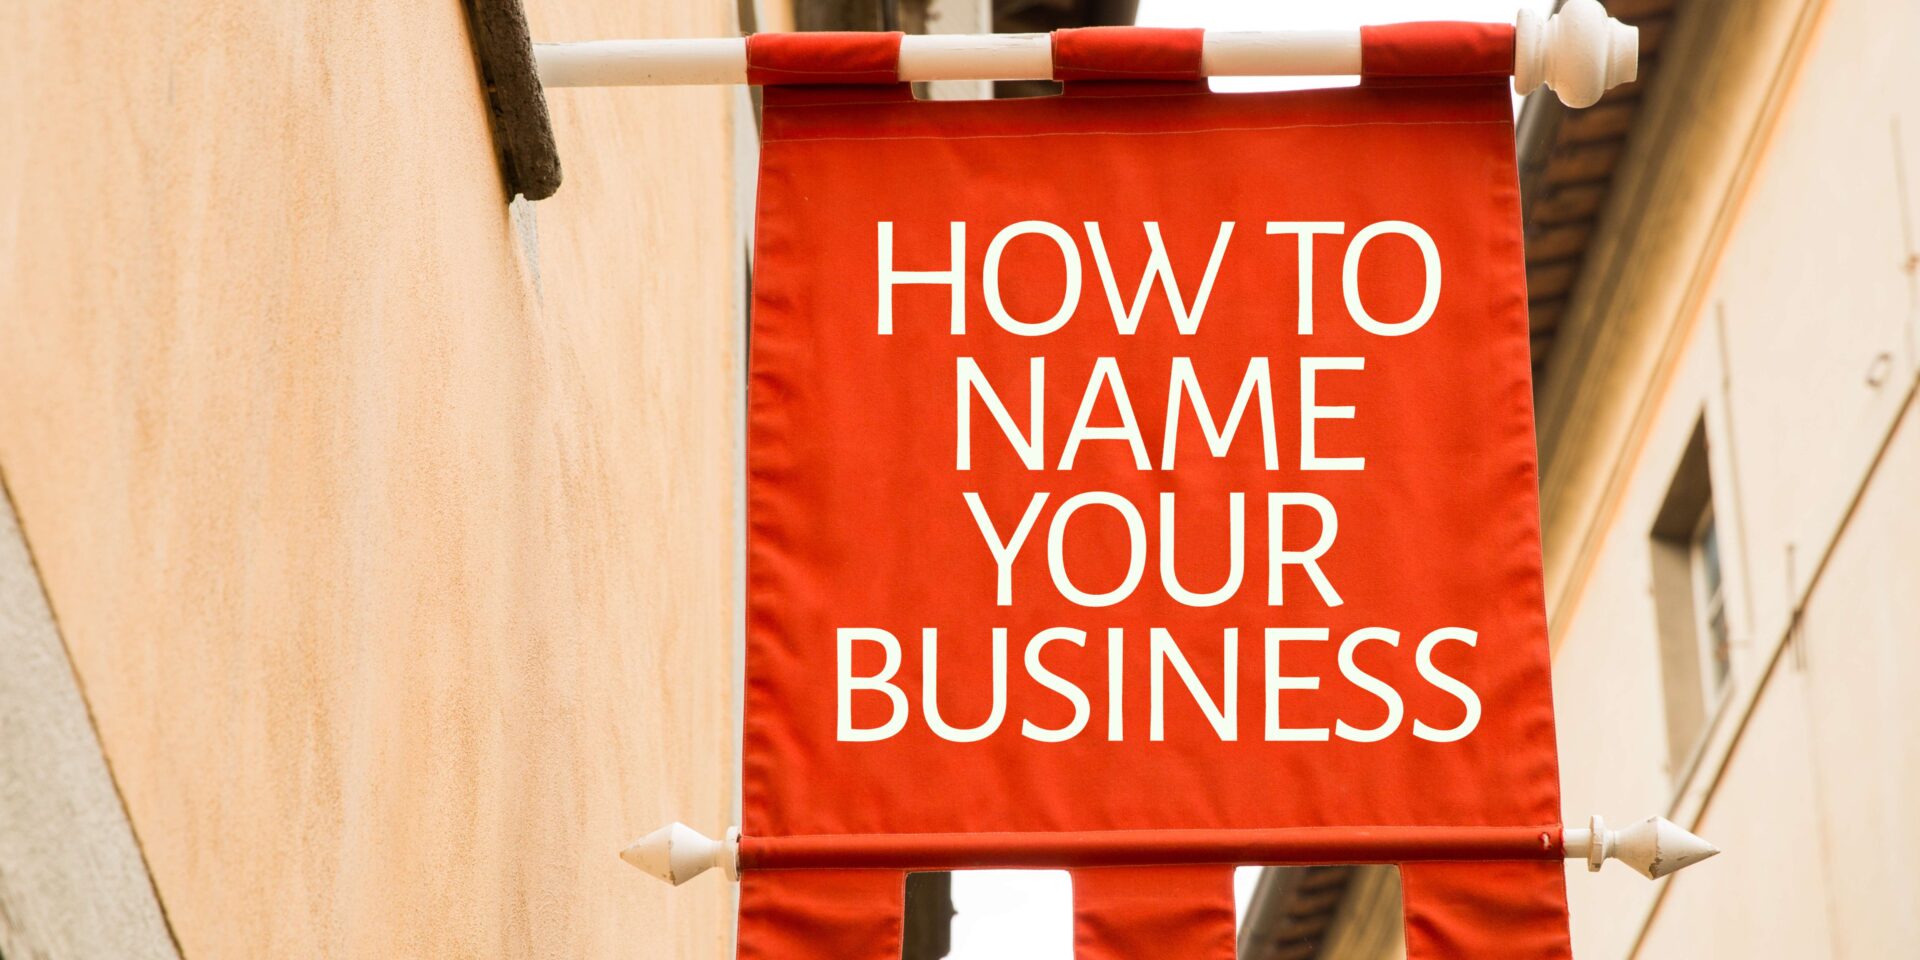 LLC Name vs. Business Name: What’s the Difference?